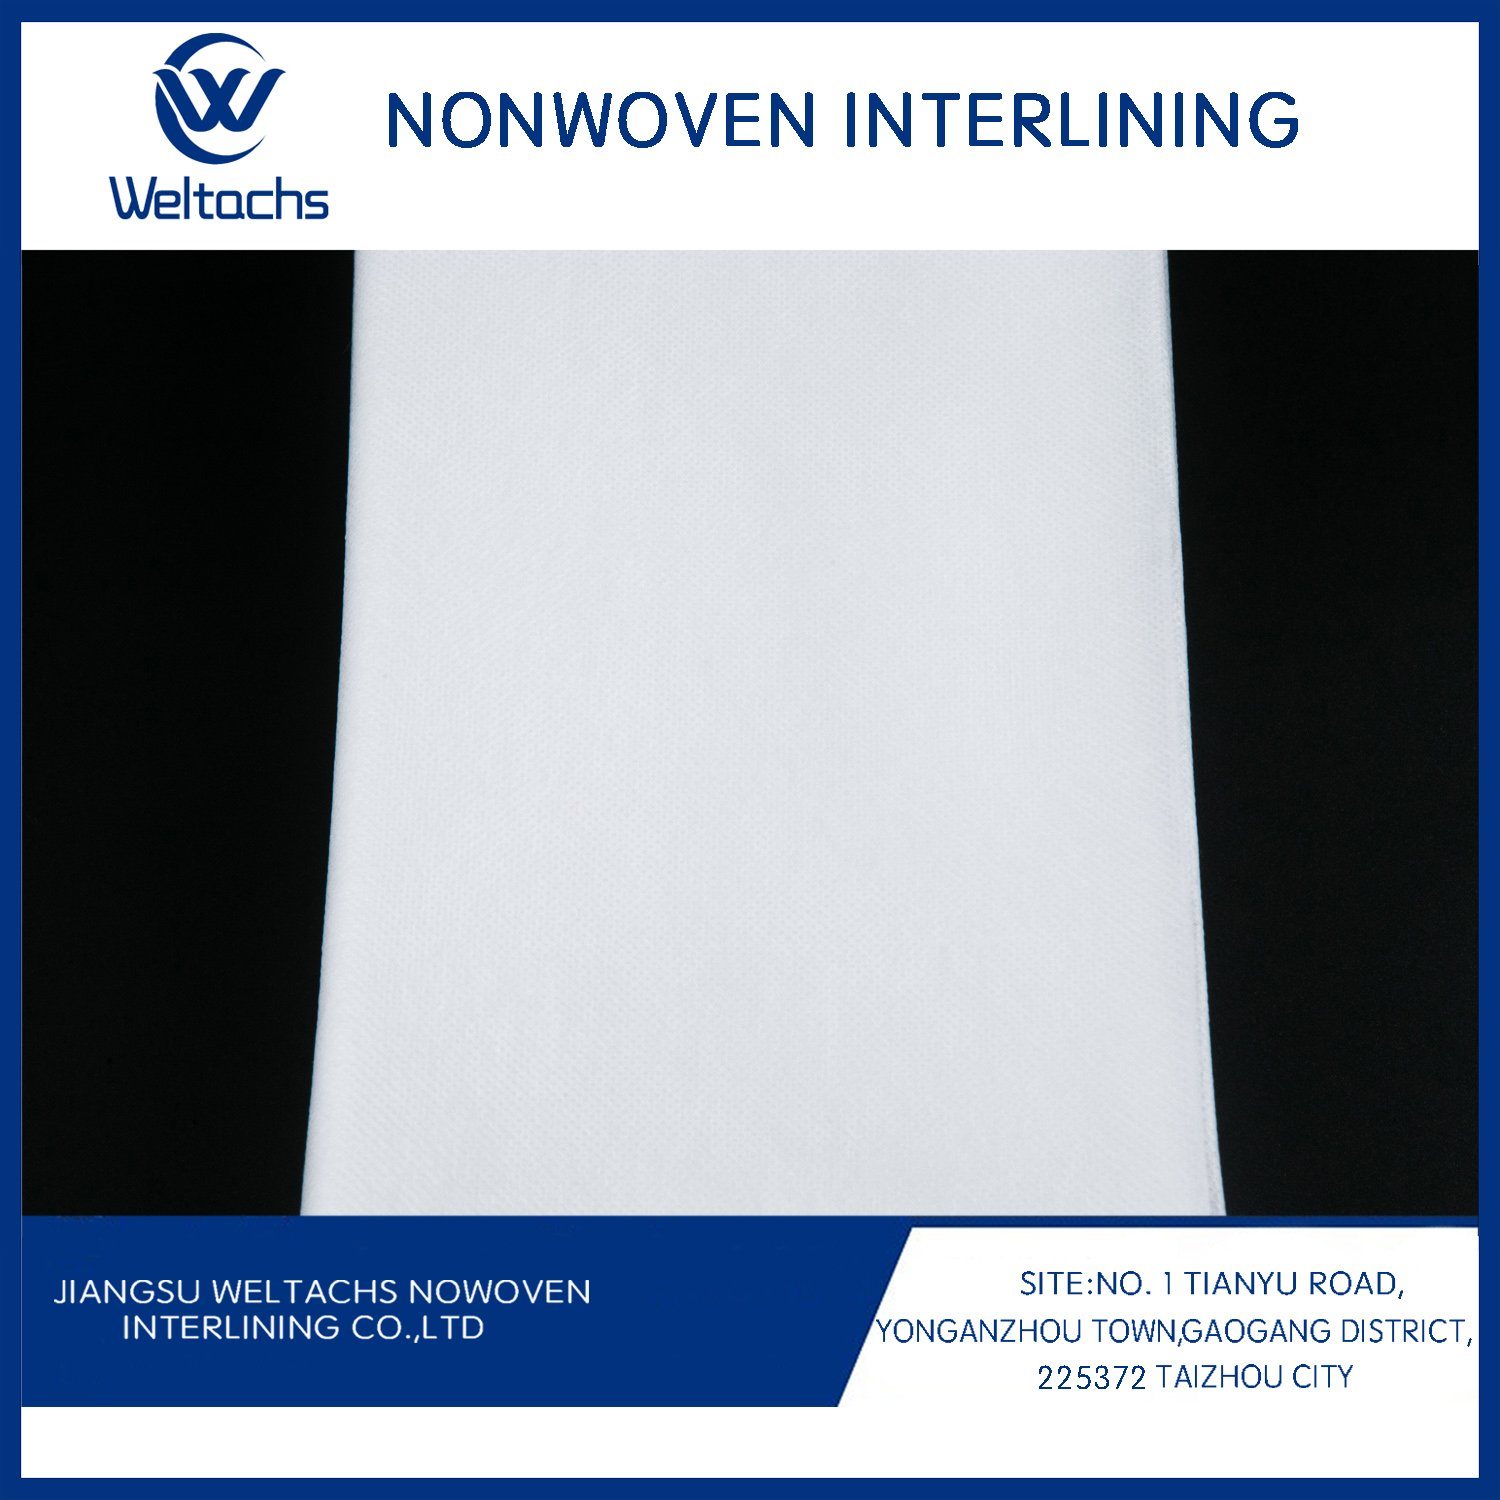 Gum Stay Polyester Interlining Chemical Bond Cut Away Interlining 1035hf Nonwoven Fusible Interlining